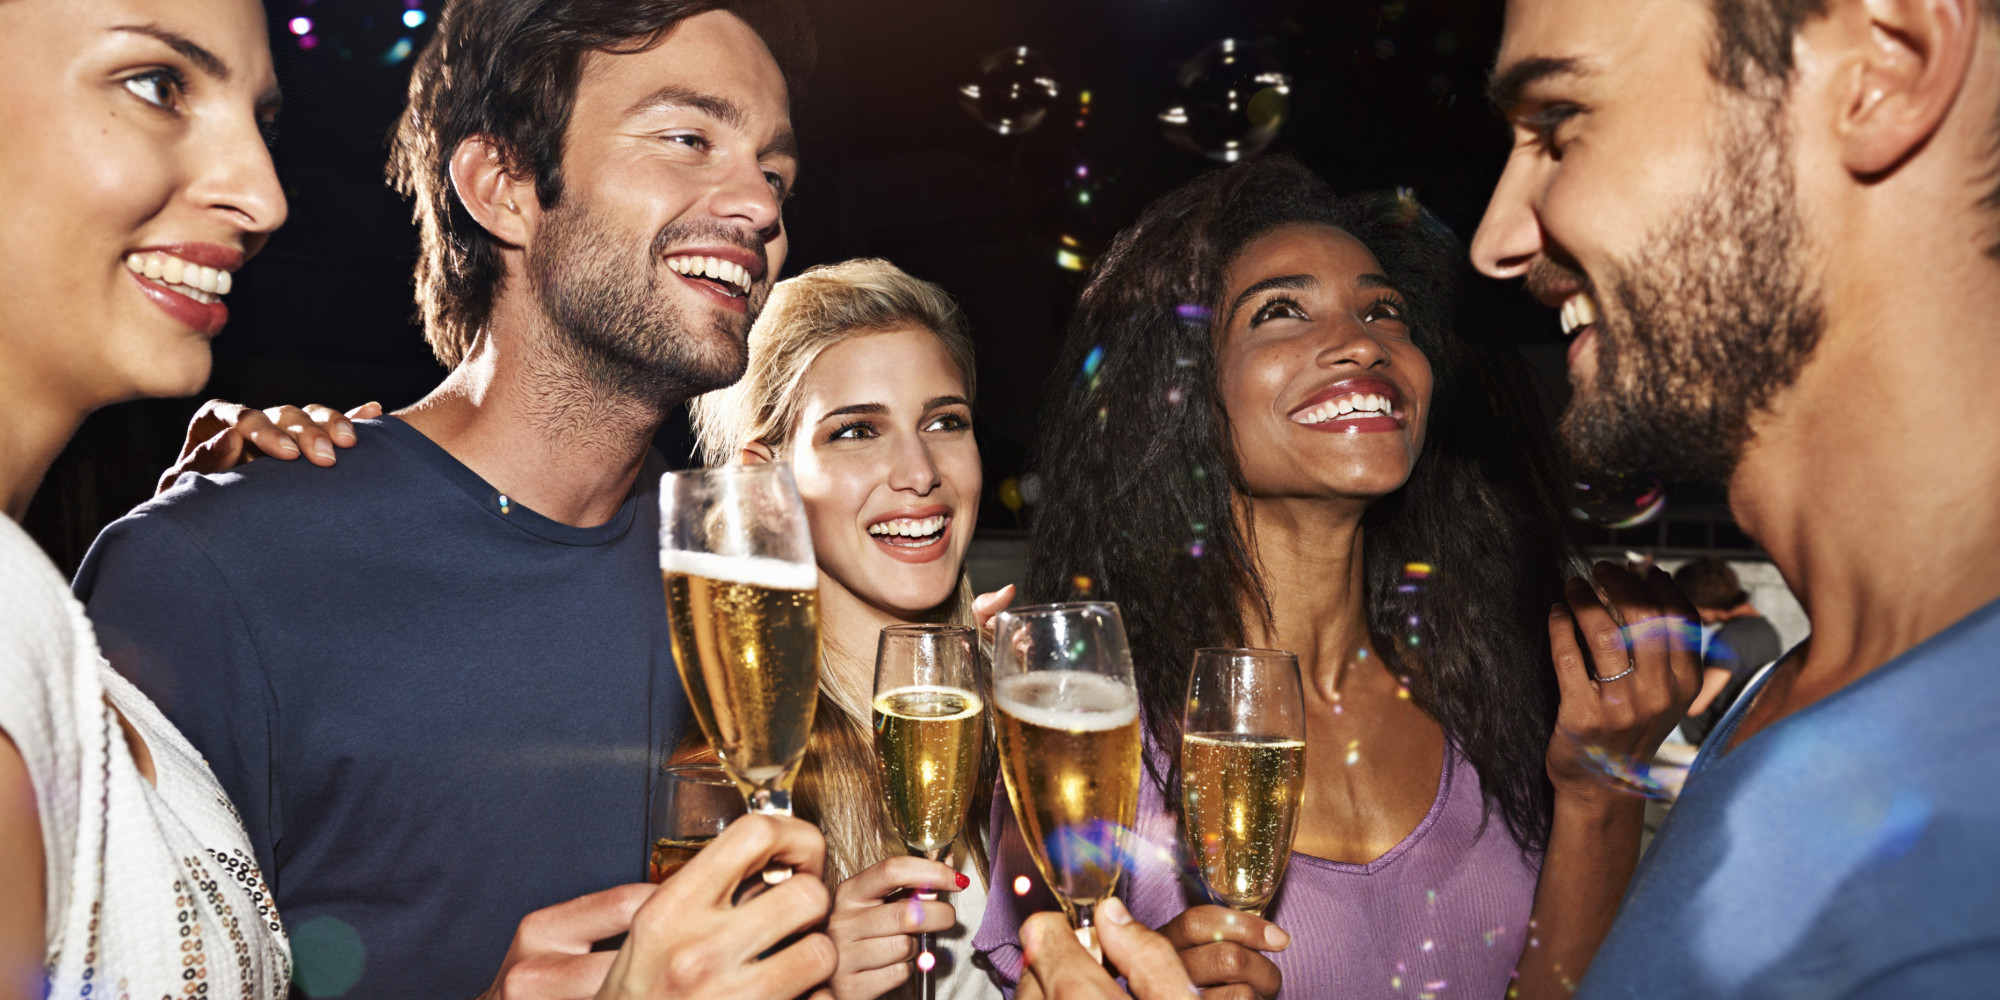 The More Friends At The Bar, The More You'll Drink | HuffPost